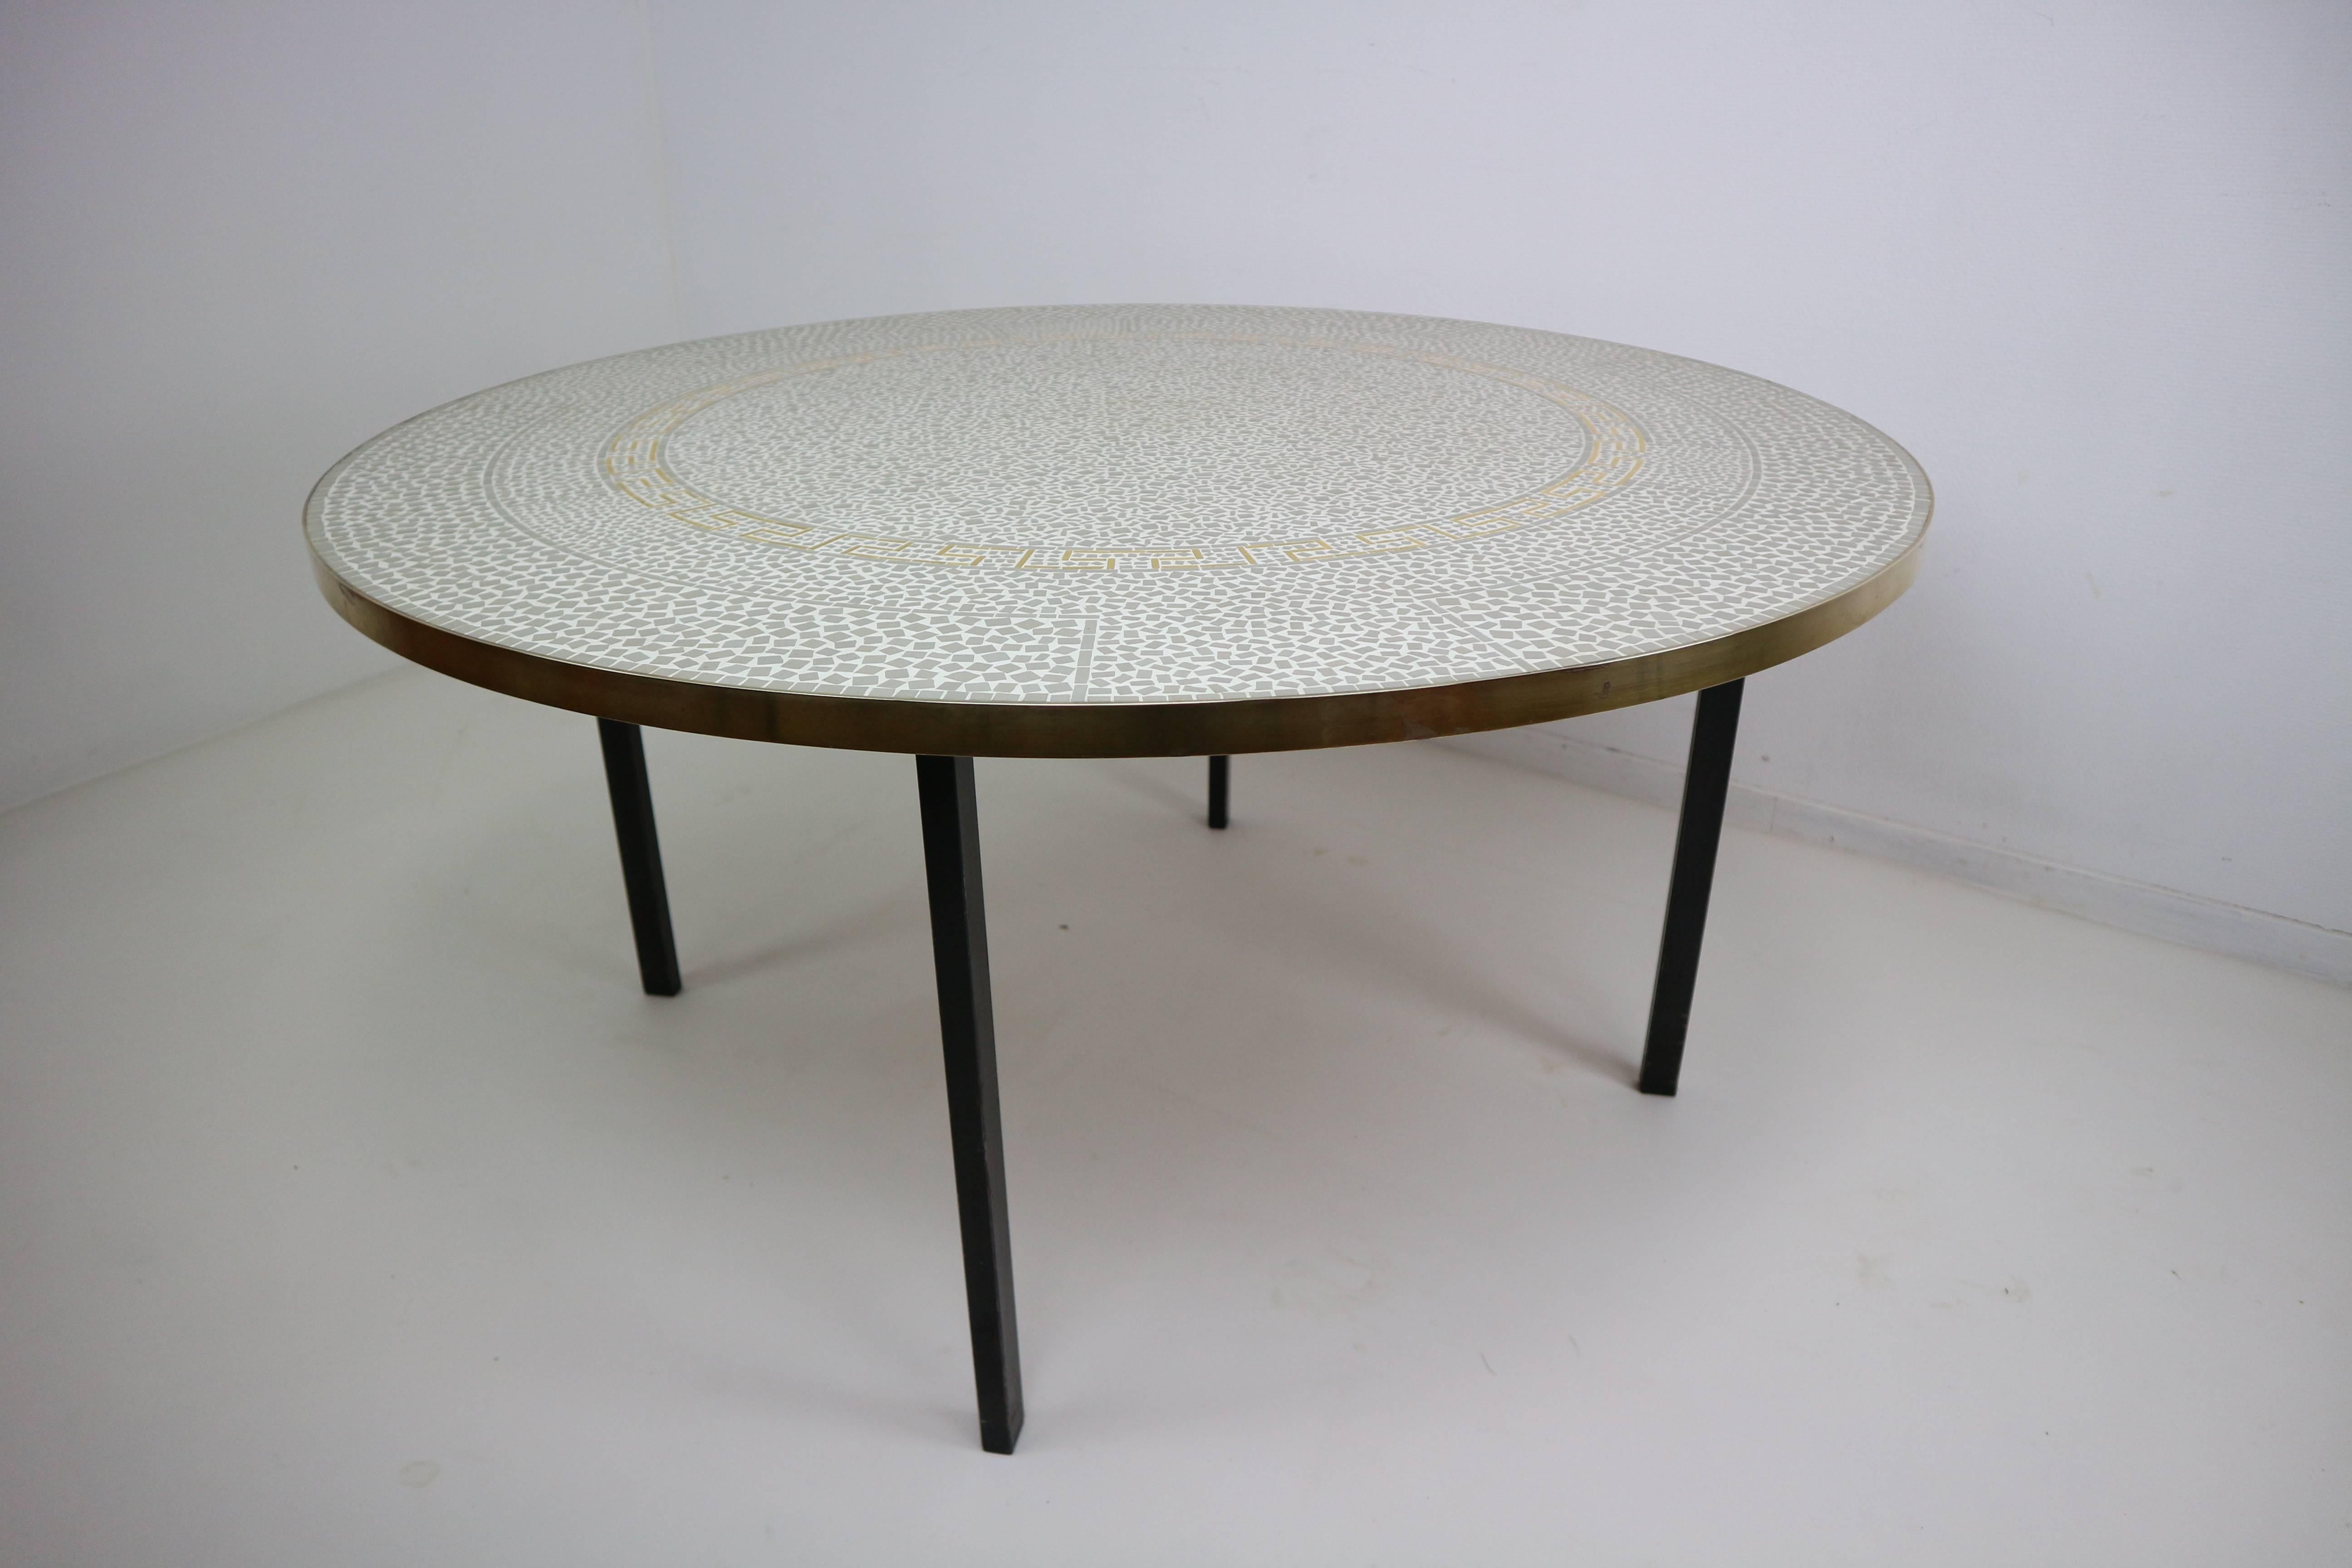 Berthold Muller sculptured circular coffee table.
Mosaic tiles and gold enamels tiles, brass band and metal feet.
The composition of the drawing is of great elegance and rarely encountered.
Very rare to find. Excellent condition.